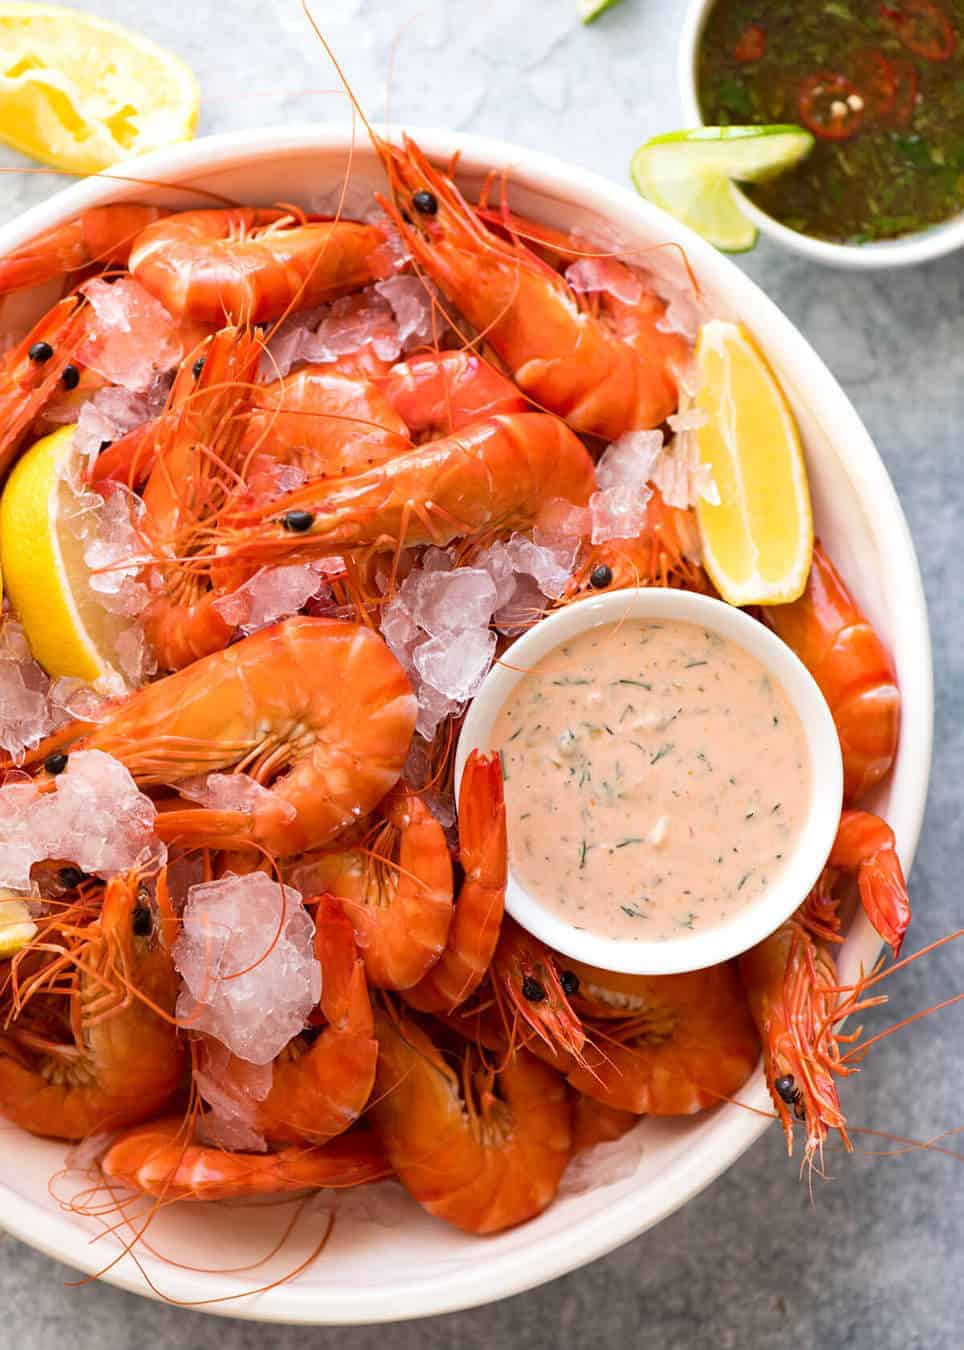 5 great Prawn Dipping Sauces: Cocktail / Seafood Sauce, Tartare, Marie Rose / Thousand Island, or a Thai Chilli Lime Sauce for something fresher. recipetineats.com